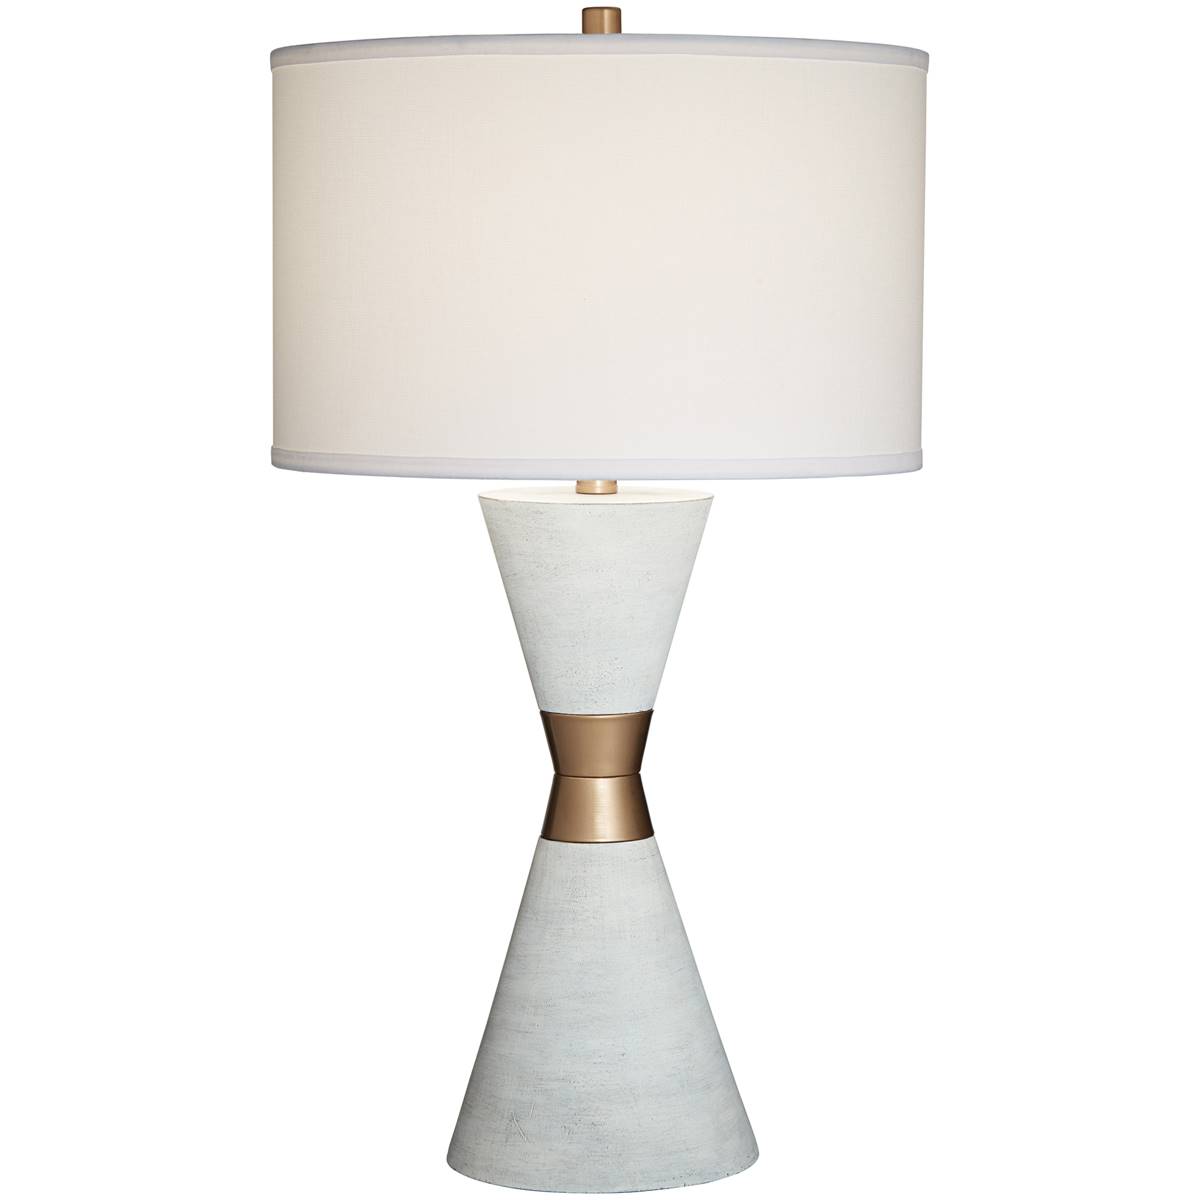 Pacific Coast Lighting Kingston 29.5in. White Table Lamp